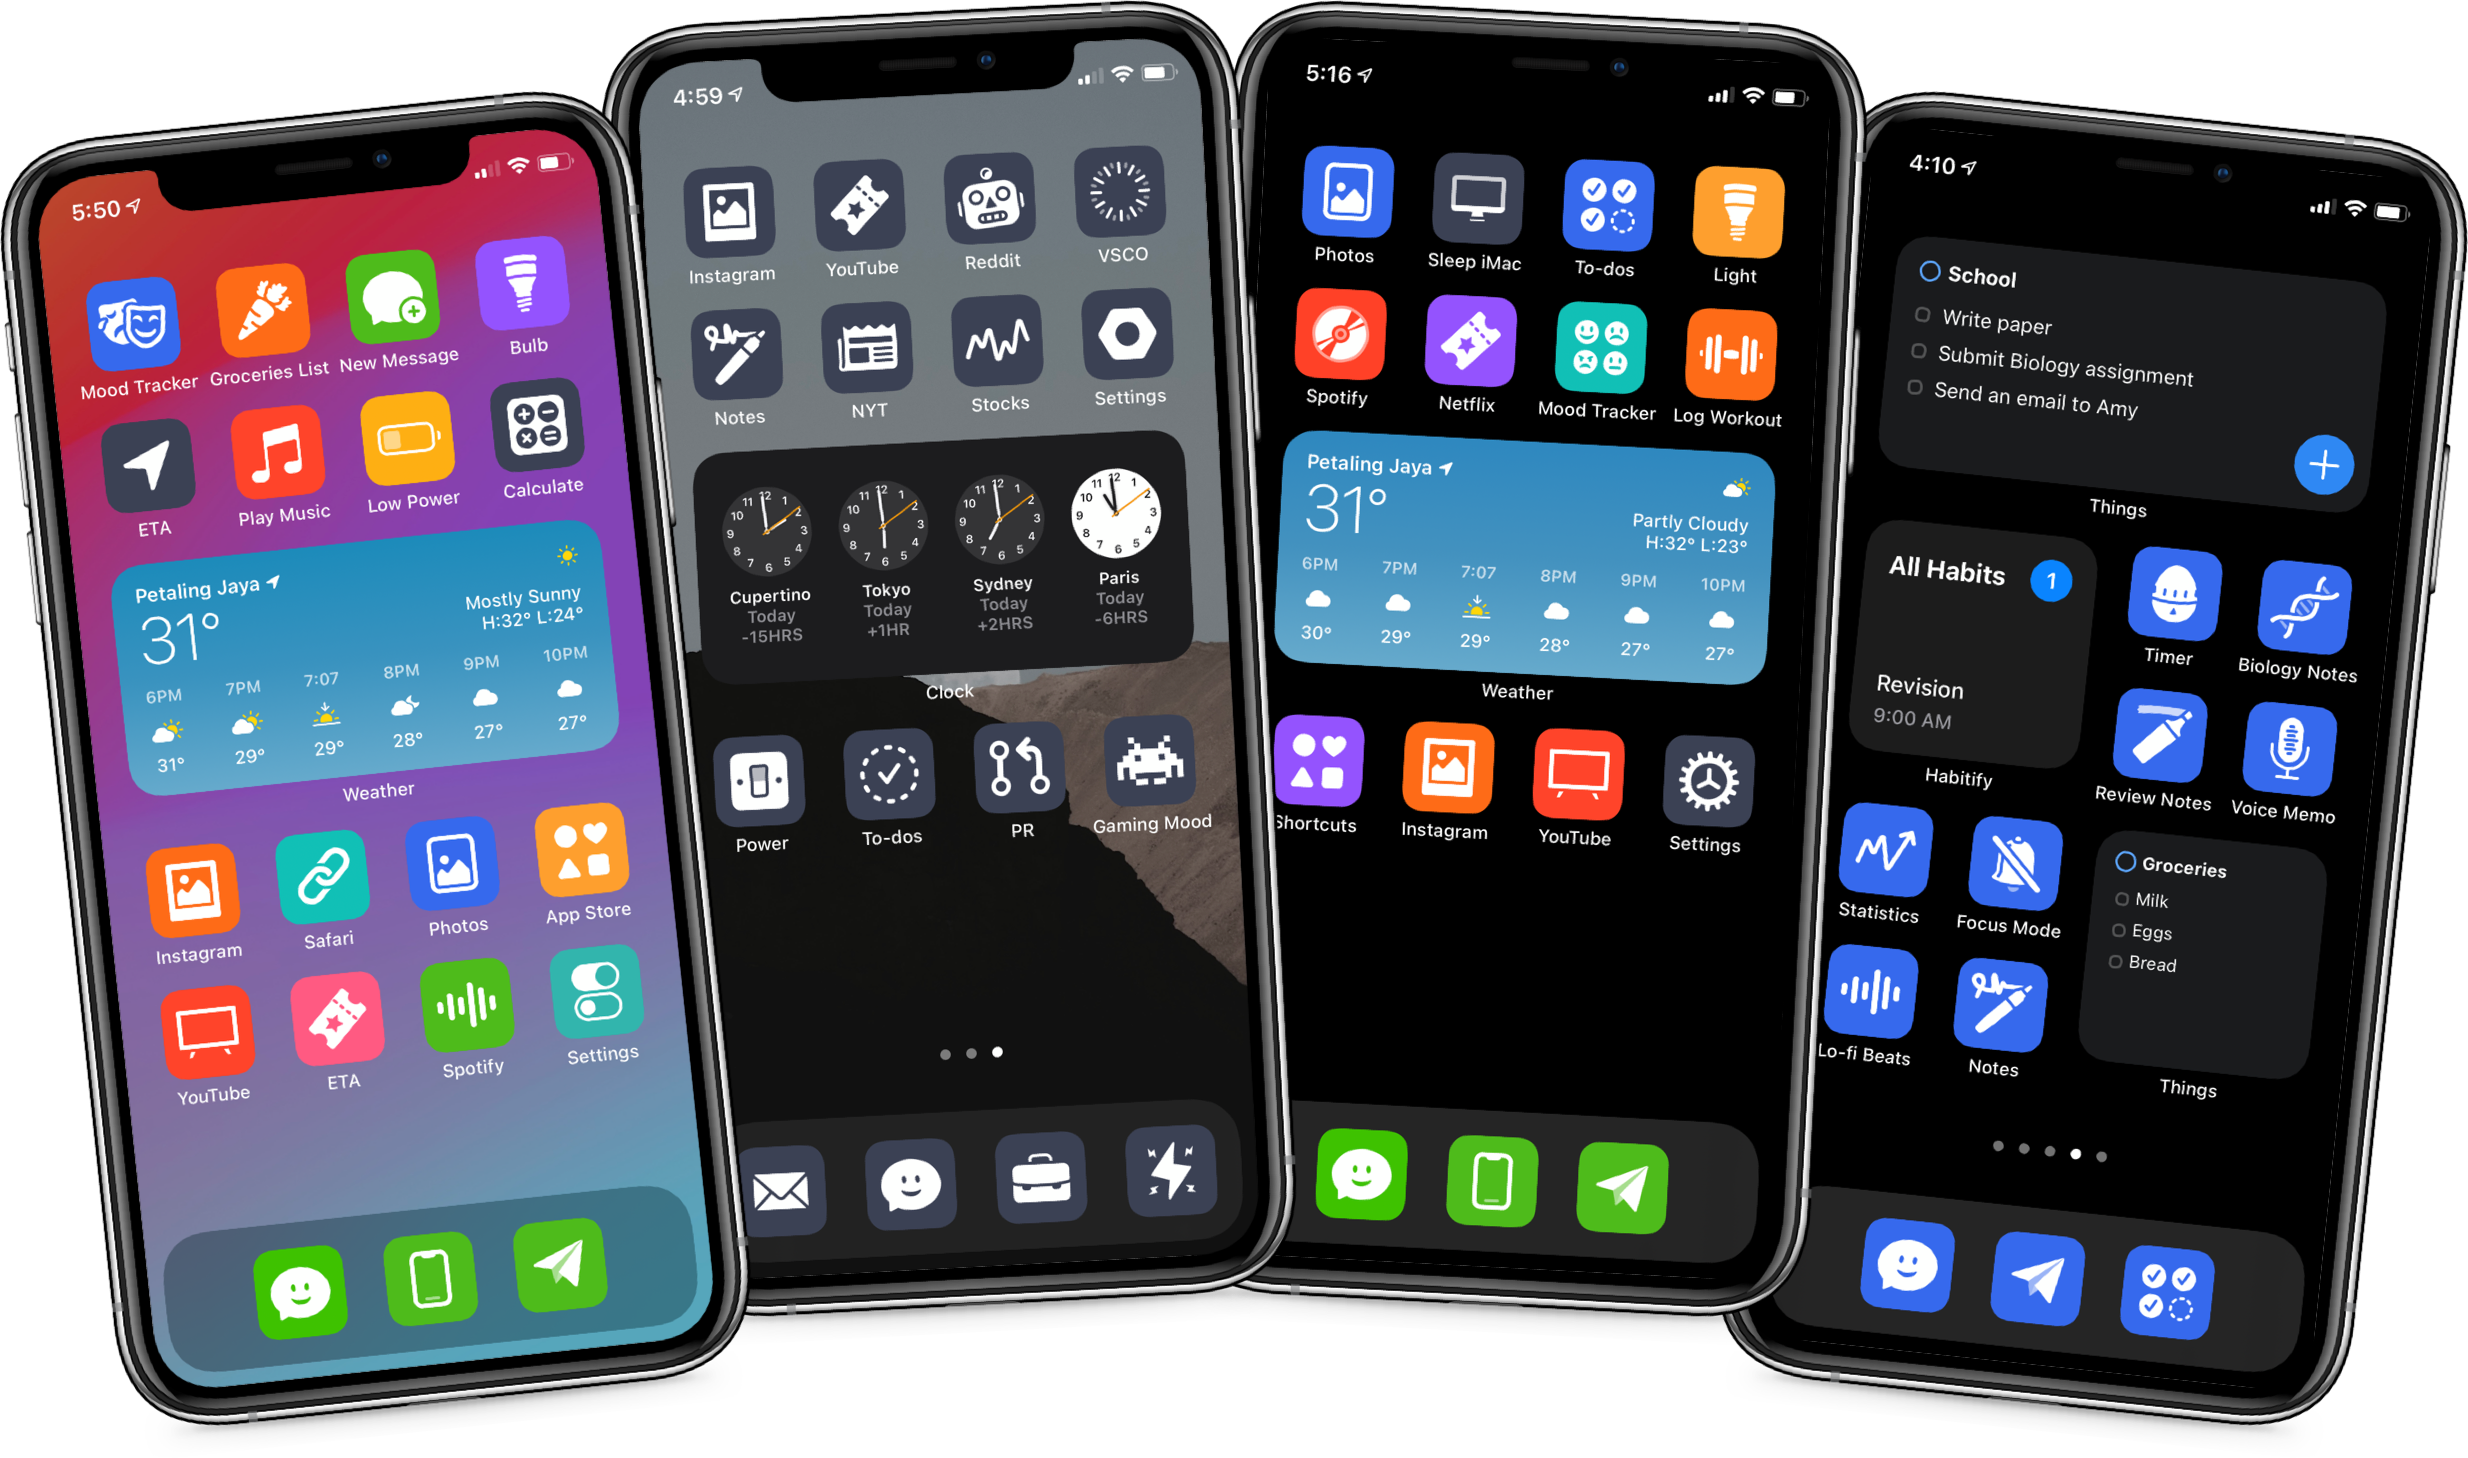 A collage of different ways you can use customize your Shortcuts icons.